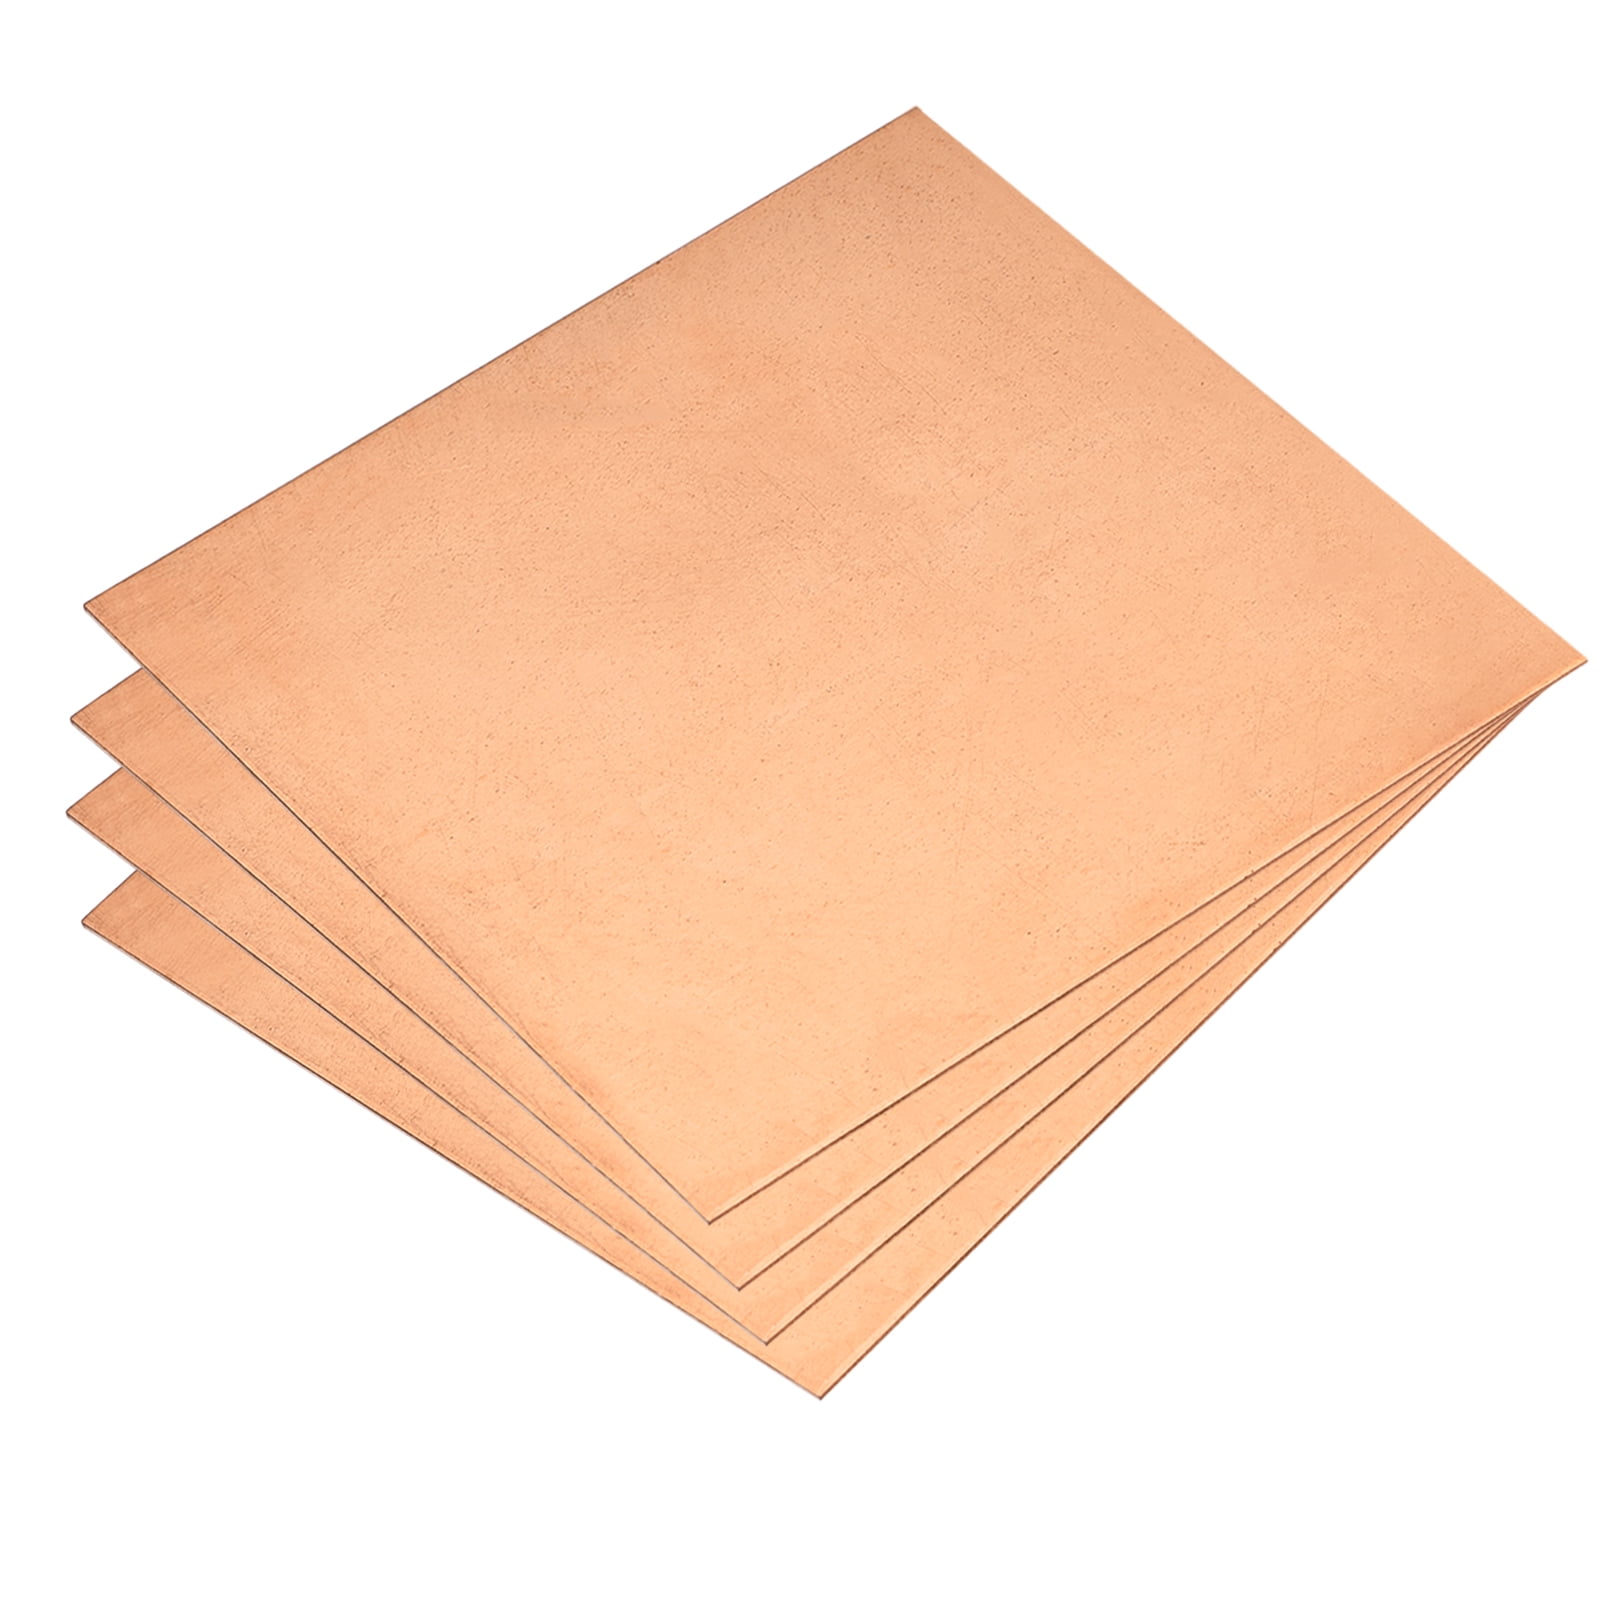 Copper Sheets for Crafts, 6 X 6 Inch, 24 Gauge/0.02 Thick - 2 PCS - Pure Copper  Sheet Metal, Copper Plates, for Jewelry, Crafts, Repairs, Enameling,  Electrical